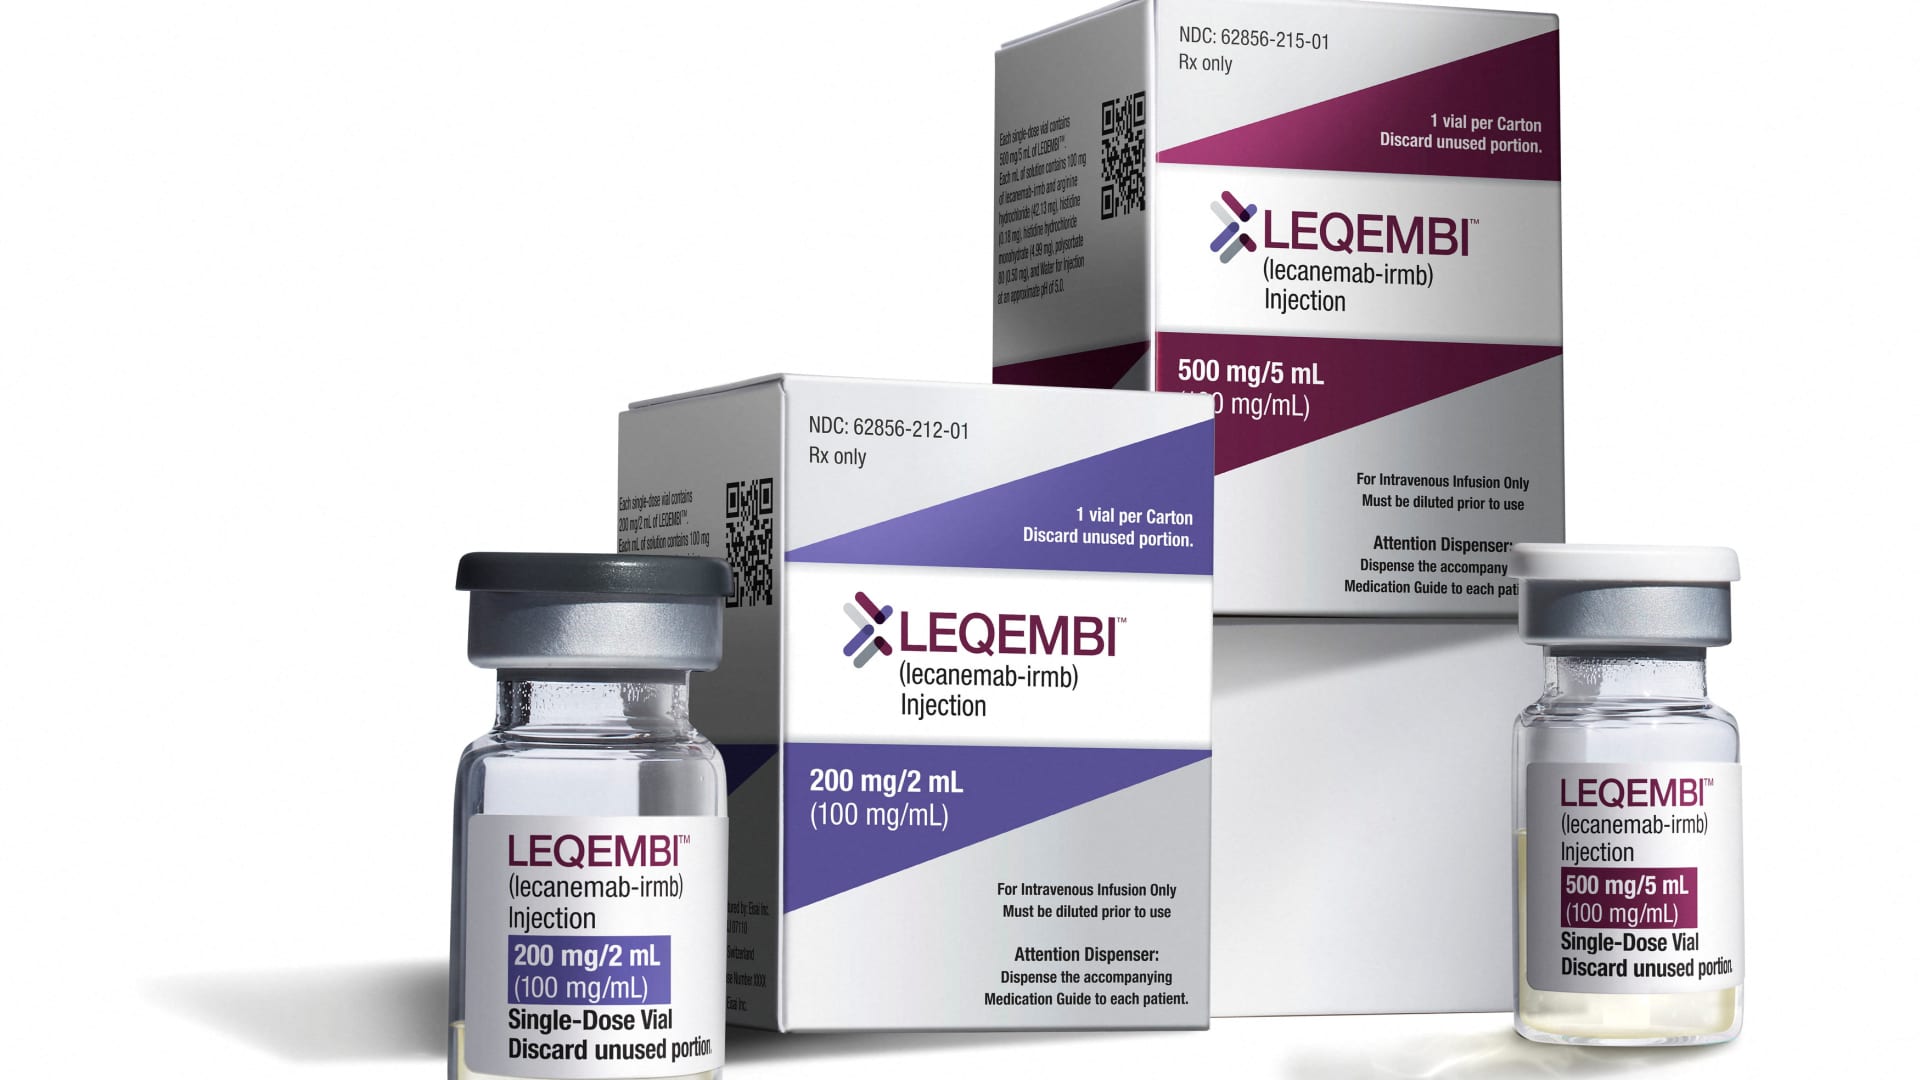 Alzheimer’s treatment Leqembi could cost Medicare up to $5 billion